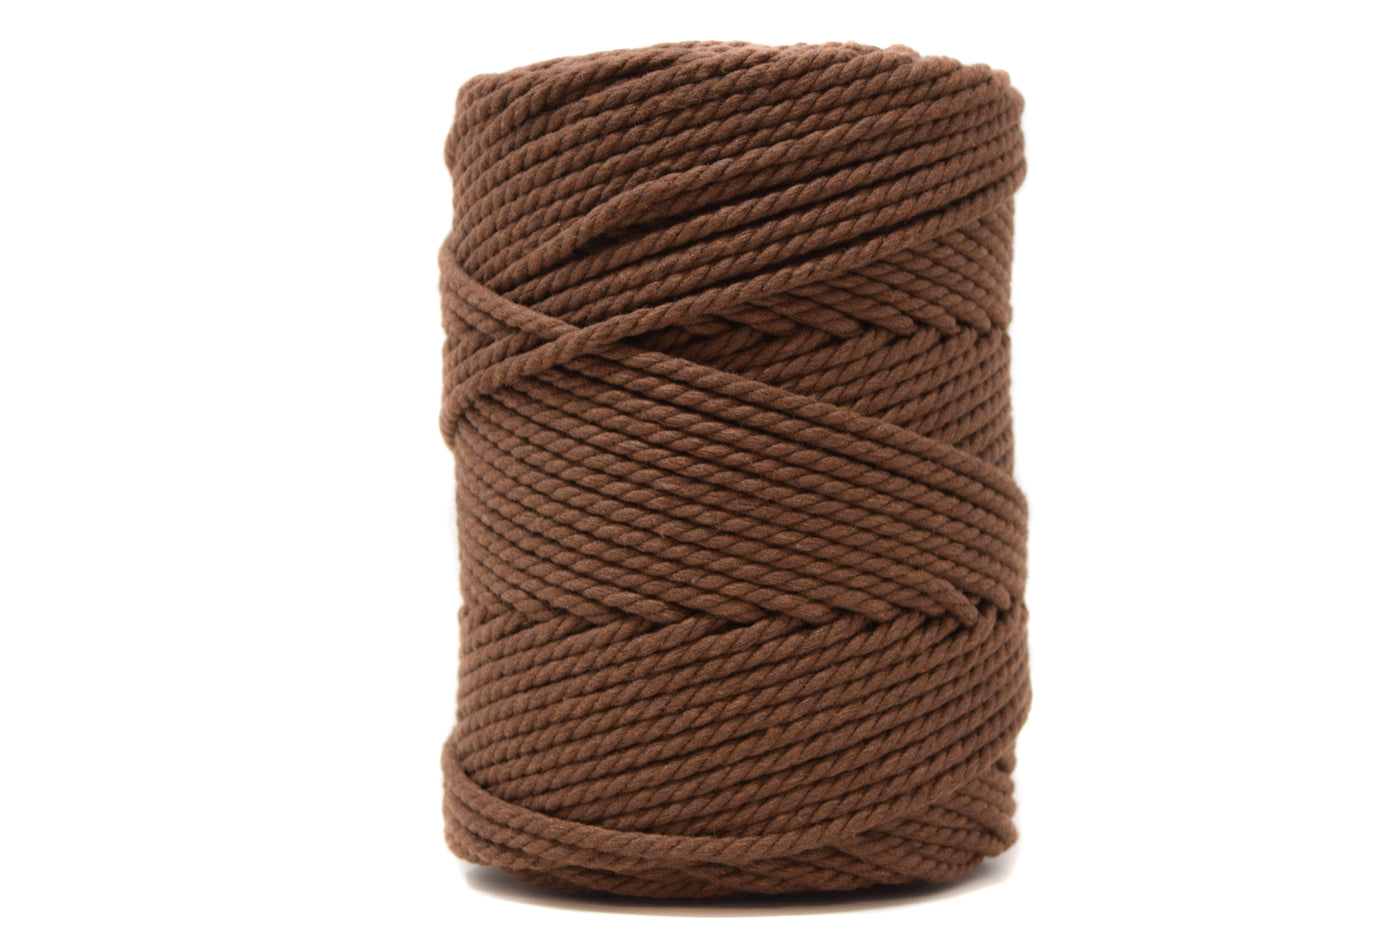 COTTON ROPE ZERO WASTE 3 MM - 3 PLY - CHOCOLATE COLOR